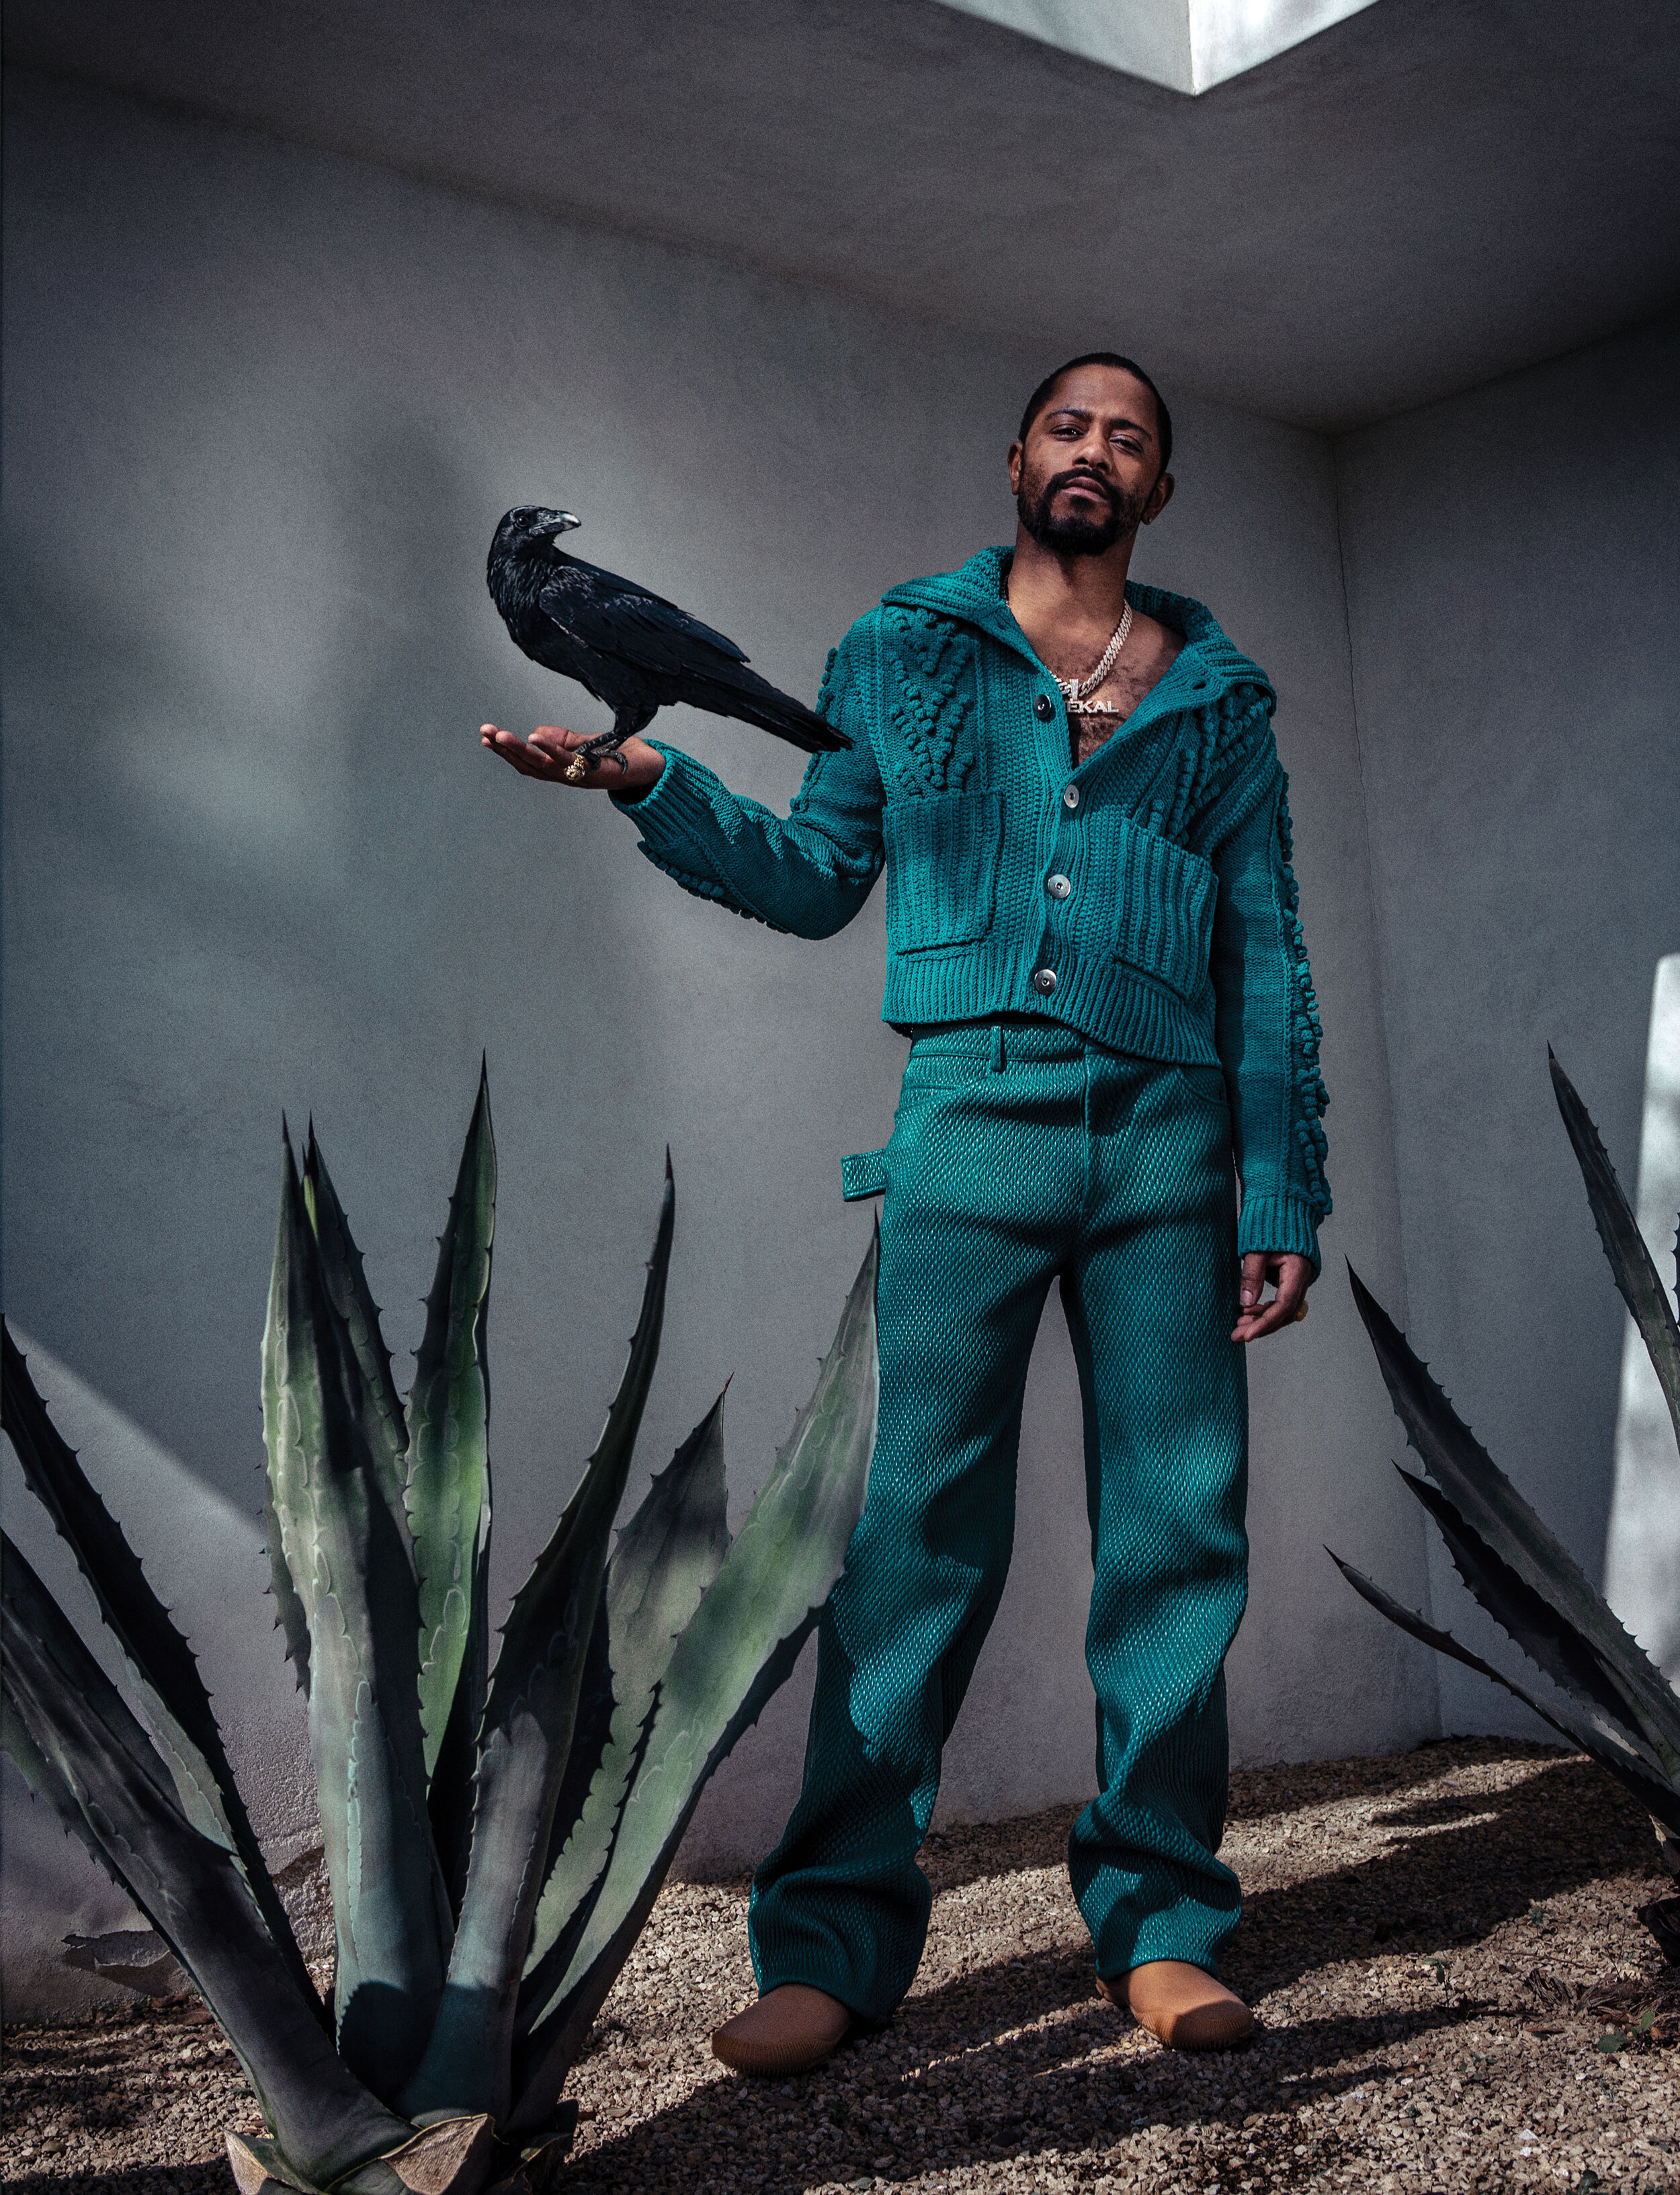 LaKeith Stanfield | Thirty Pieces of Silver, or Divinity? As the Crow  Flies...